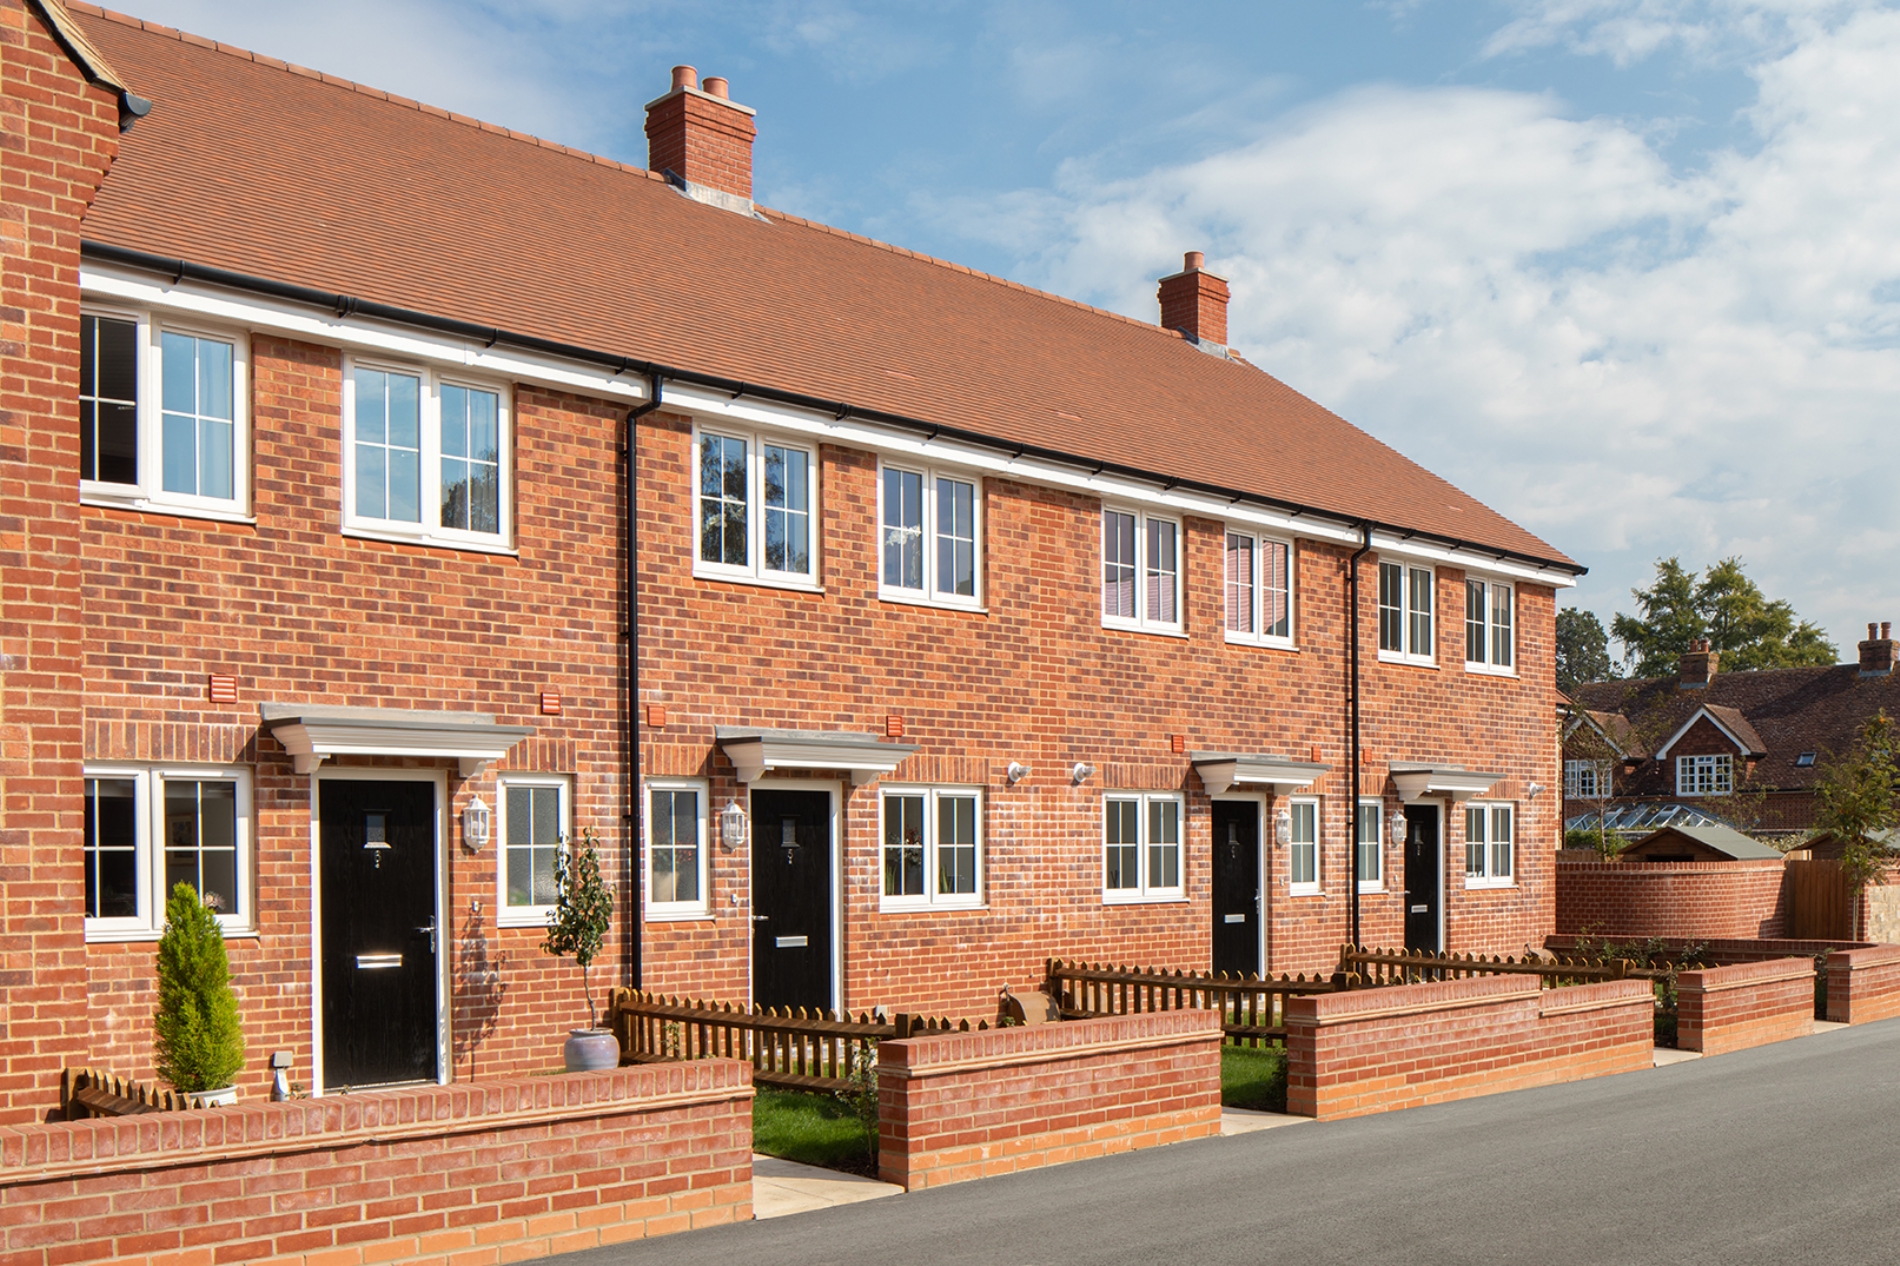 Spring 2021 to see Midhurst affordable homes project launch